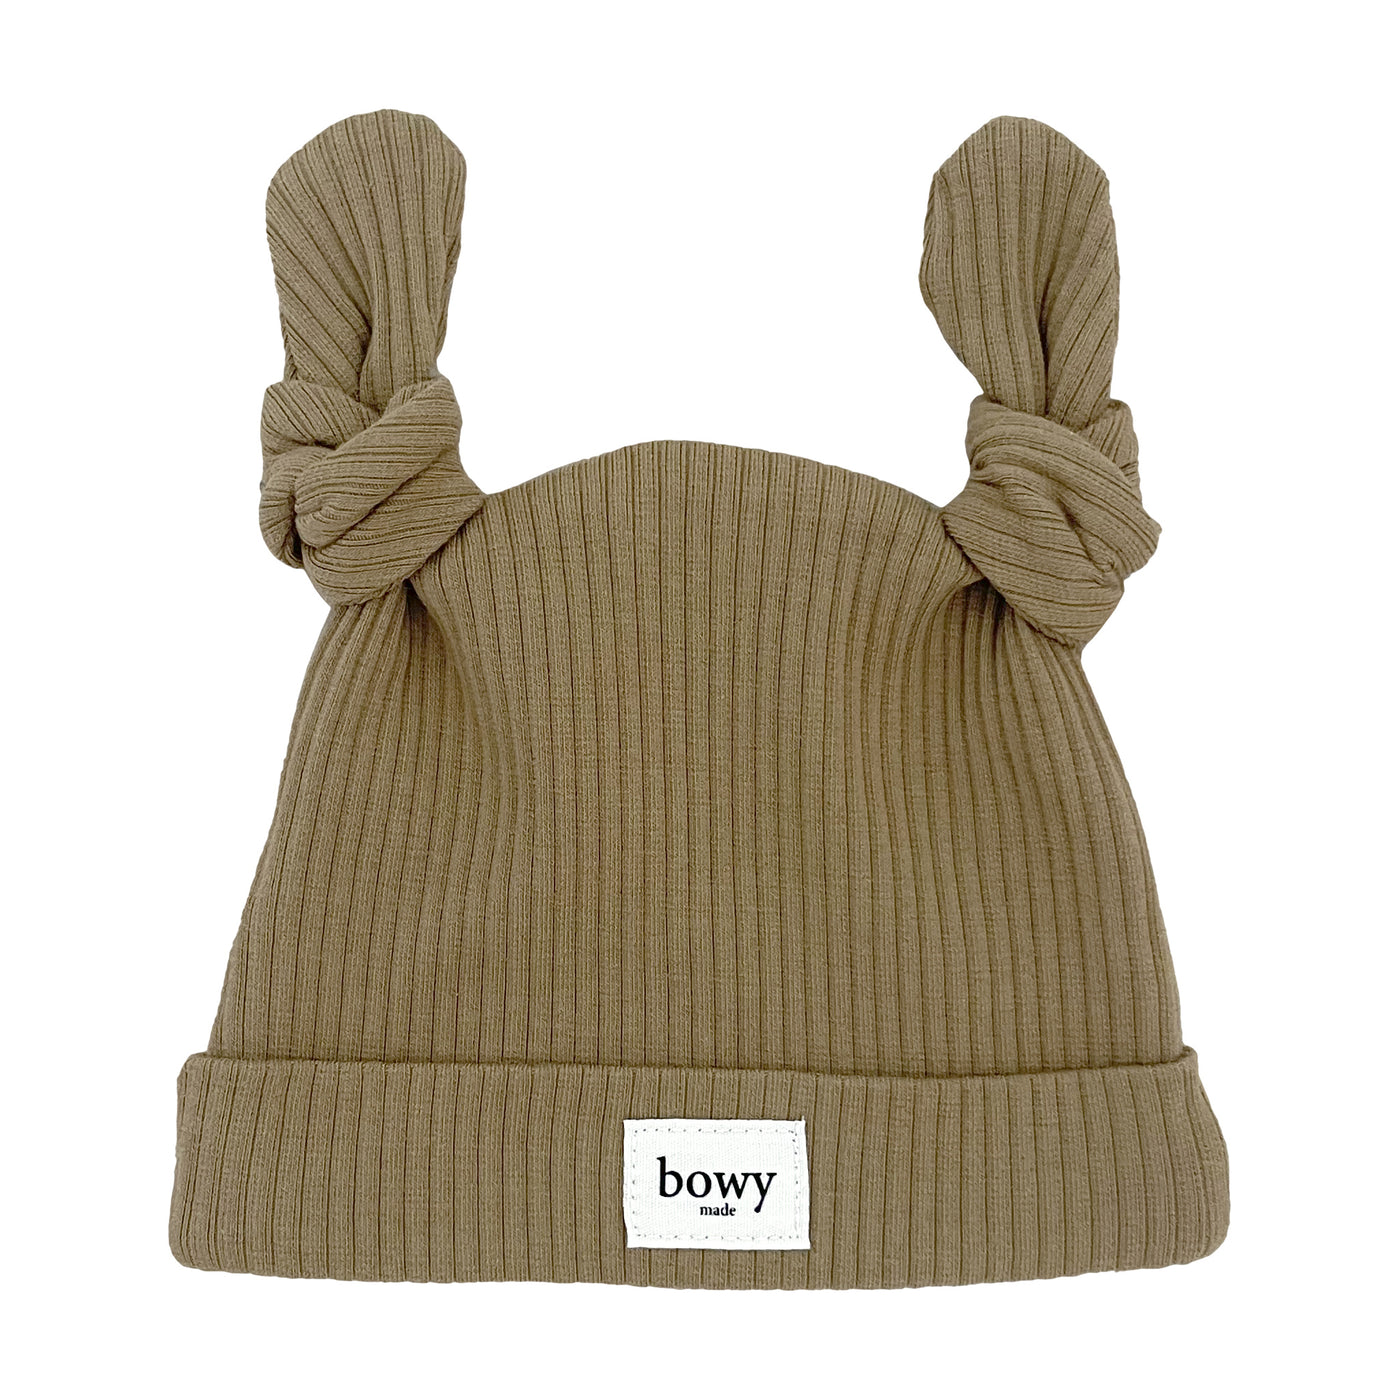 Double Knot Beanie - Olive